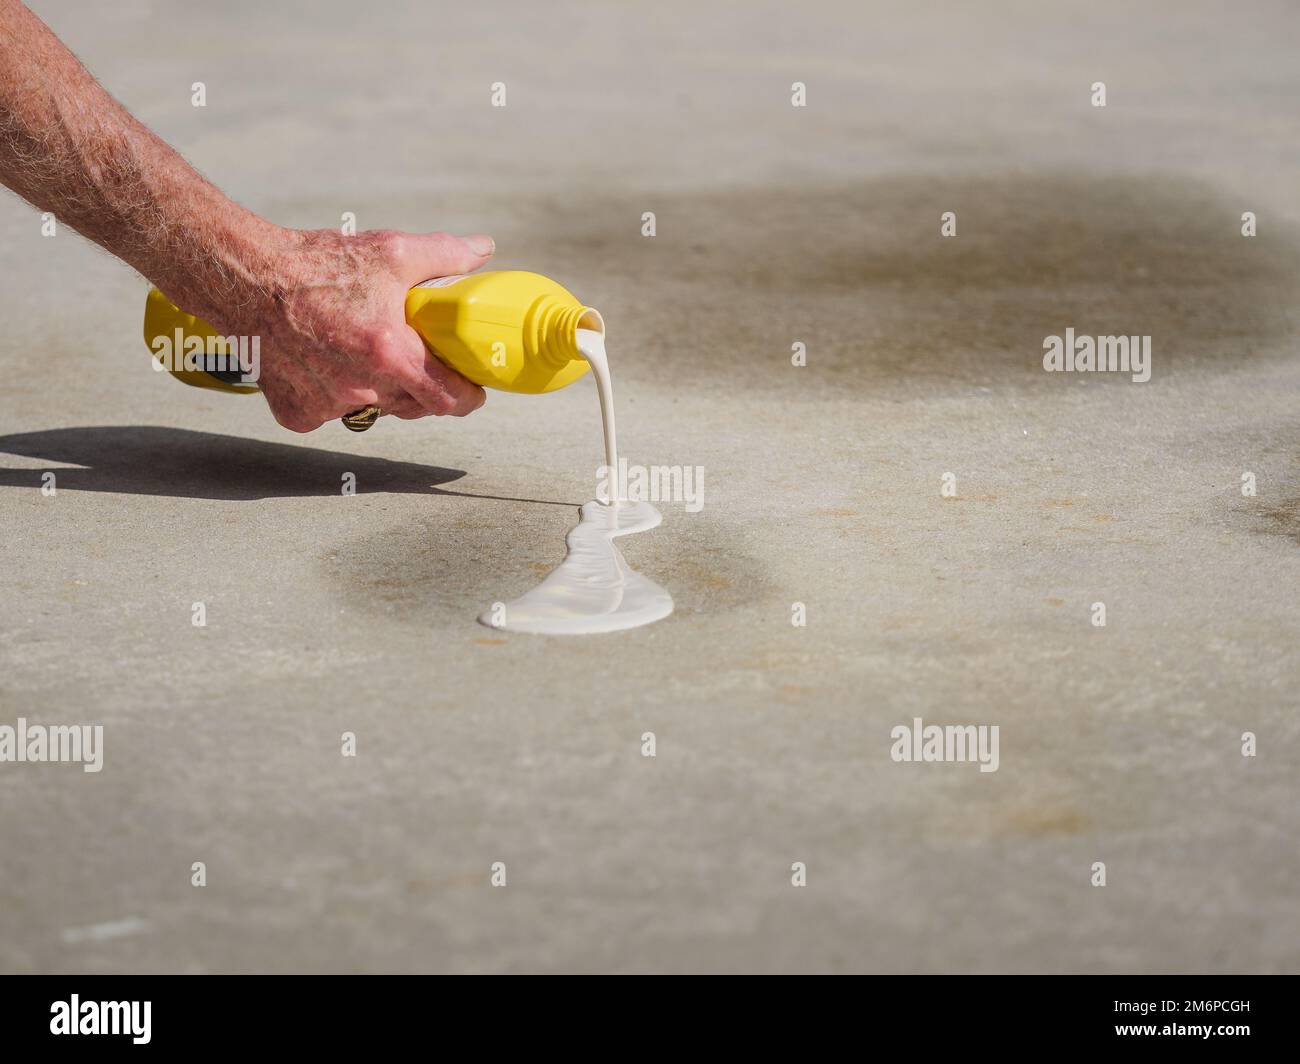 Man applying oil stain remover to concrete driveway. Removing automobile motor oil stains from parking spots with cleaning product. Stock Photo